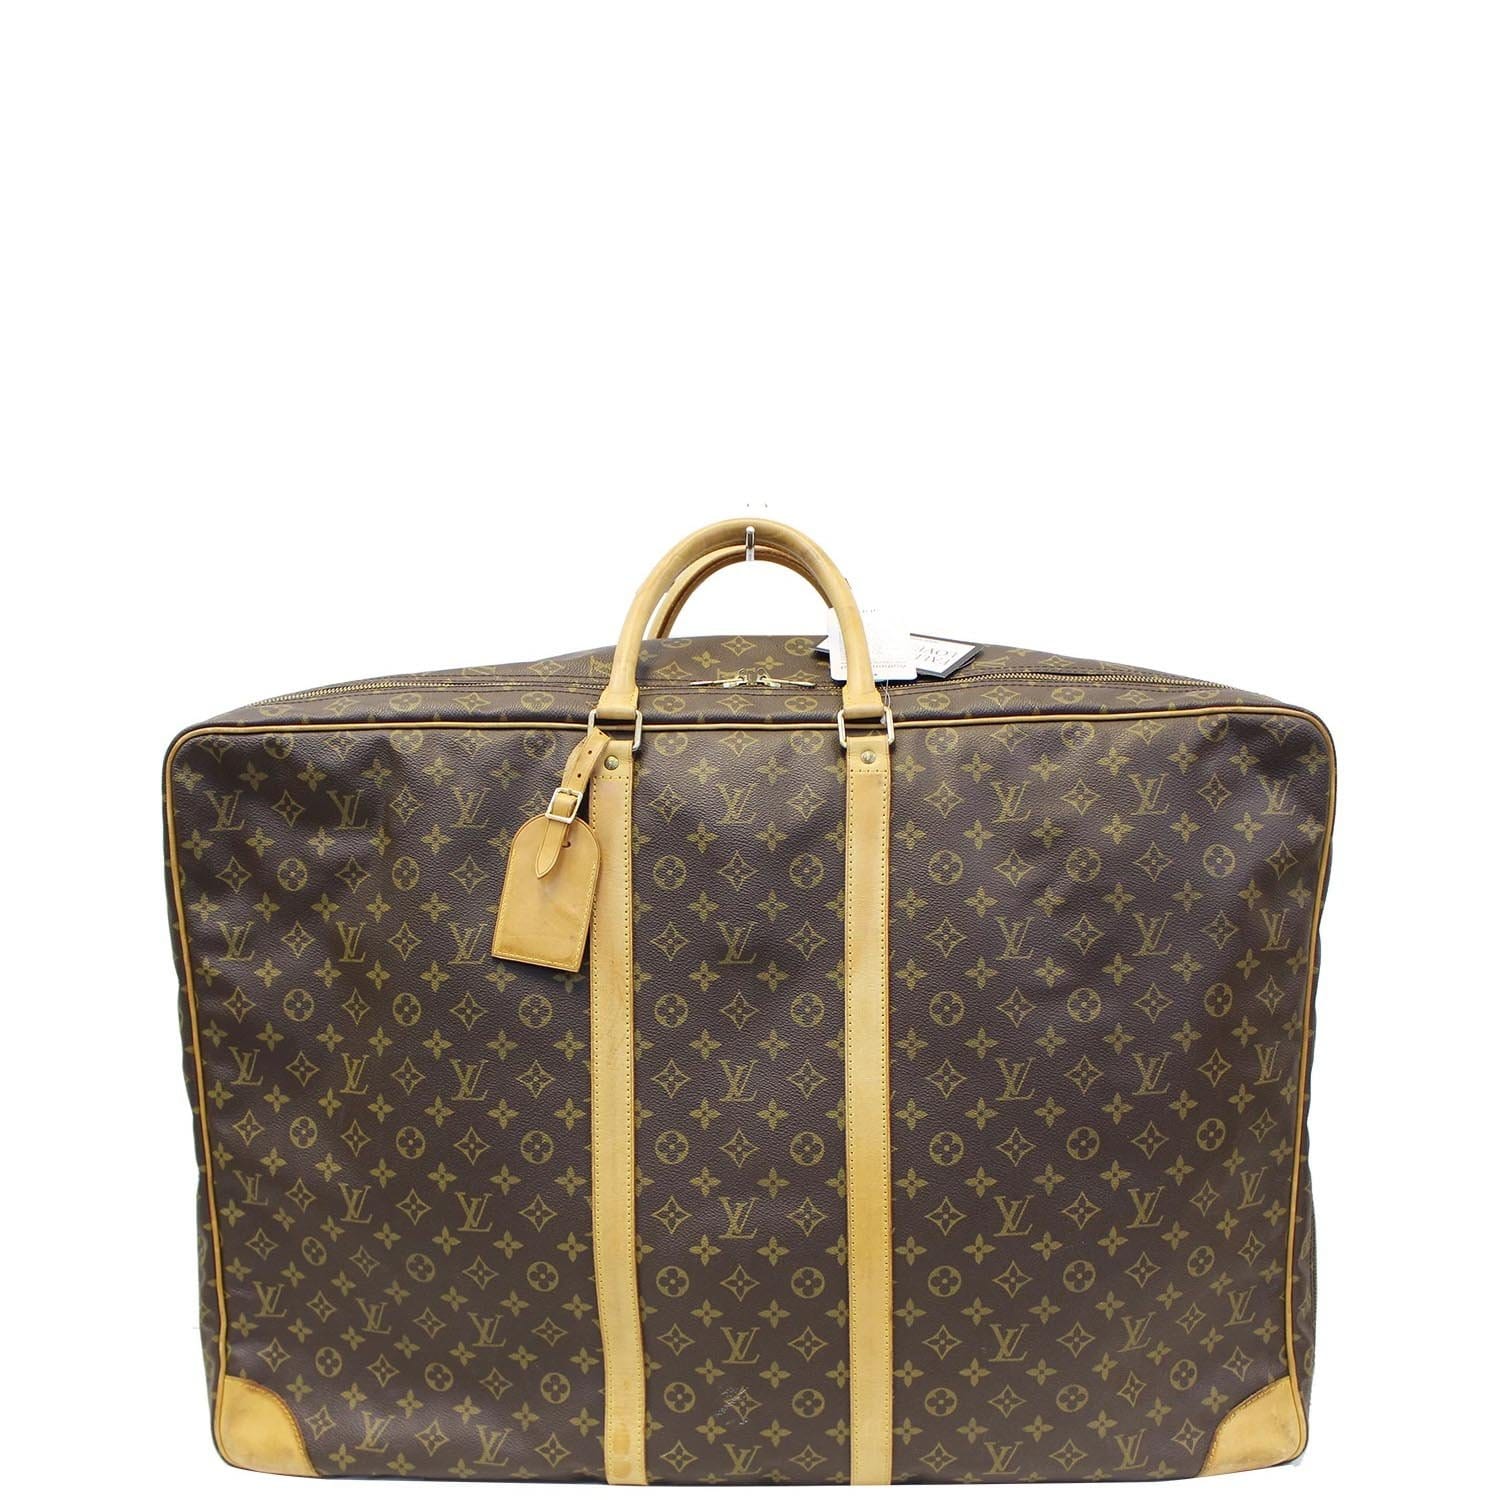 Luggage Luxury Designer By Louis Vuitton Size: Large